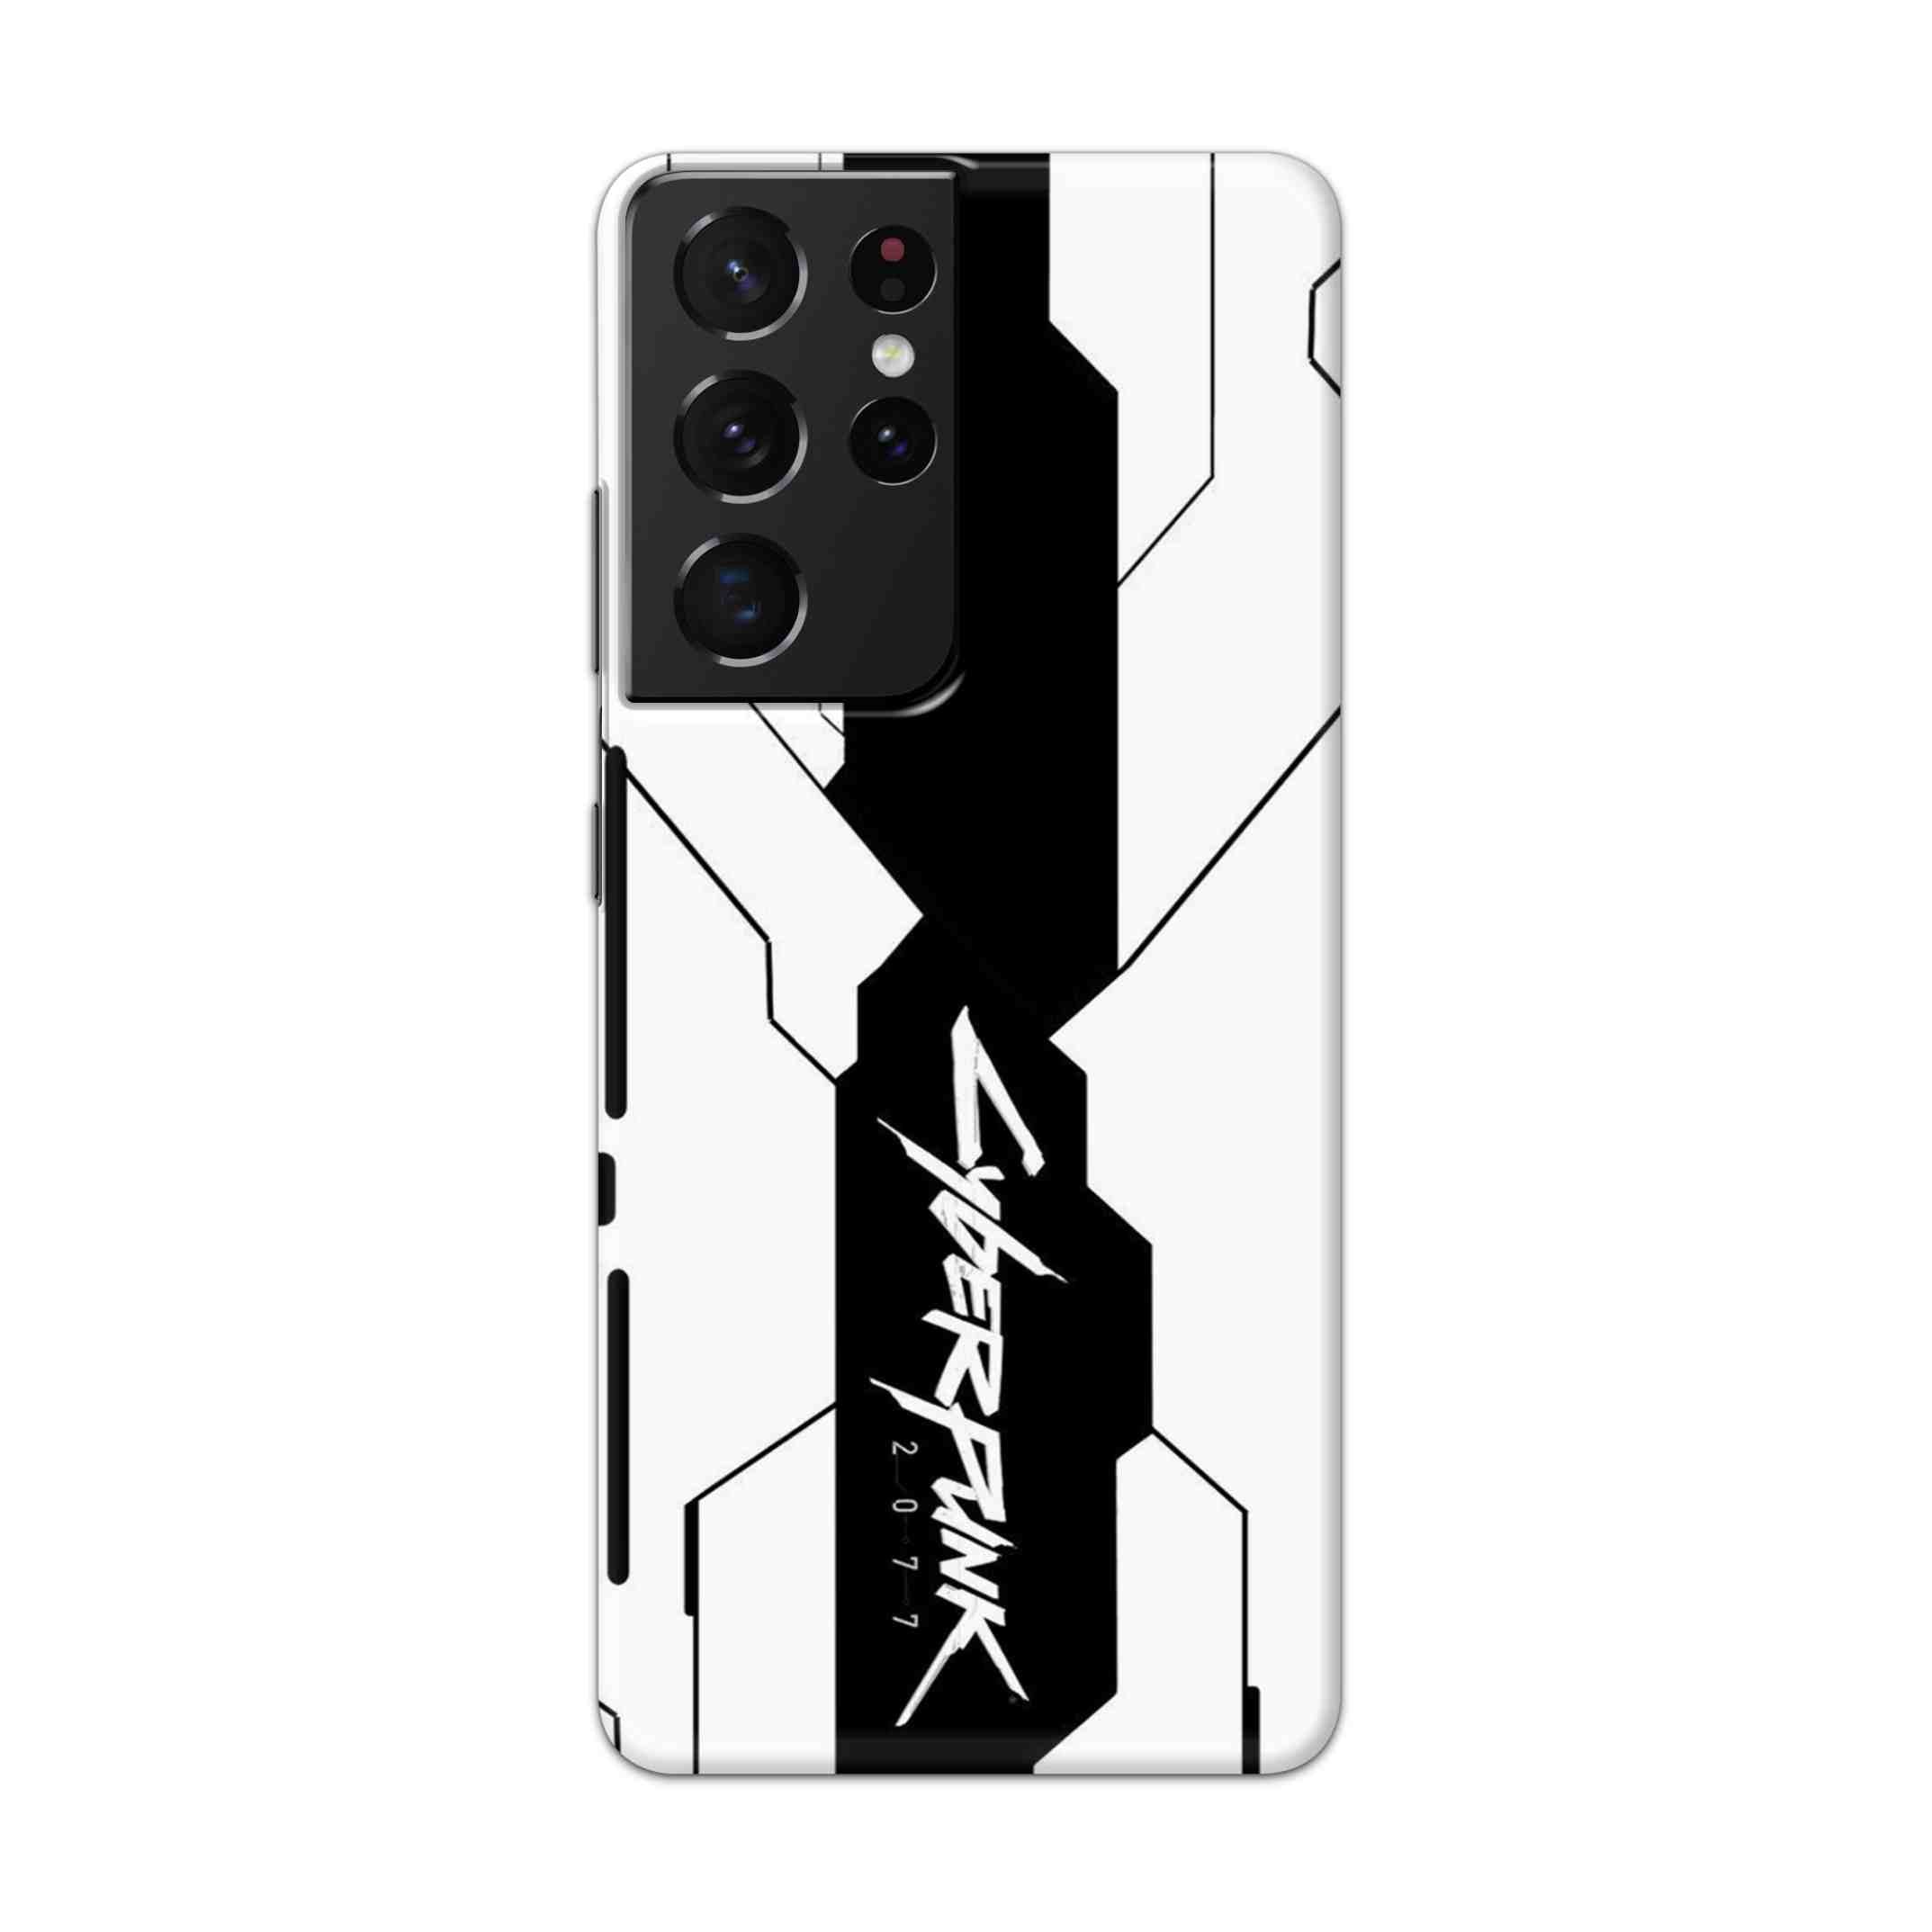 Buy Cyberpunk 2077 Hard Back Mobile Phone Case Cover For Samsung Galaxy S21 Ultra Online